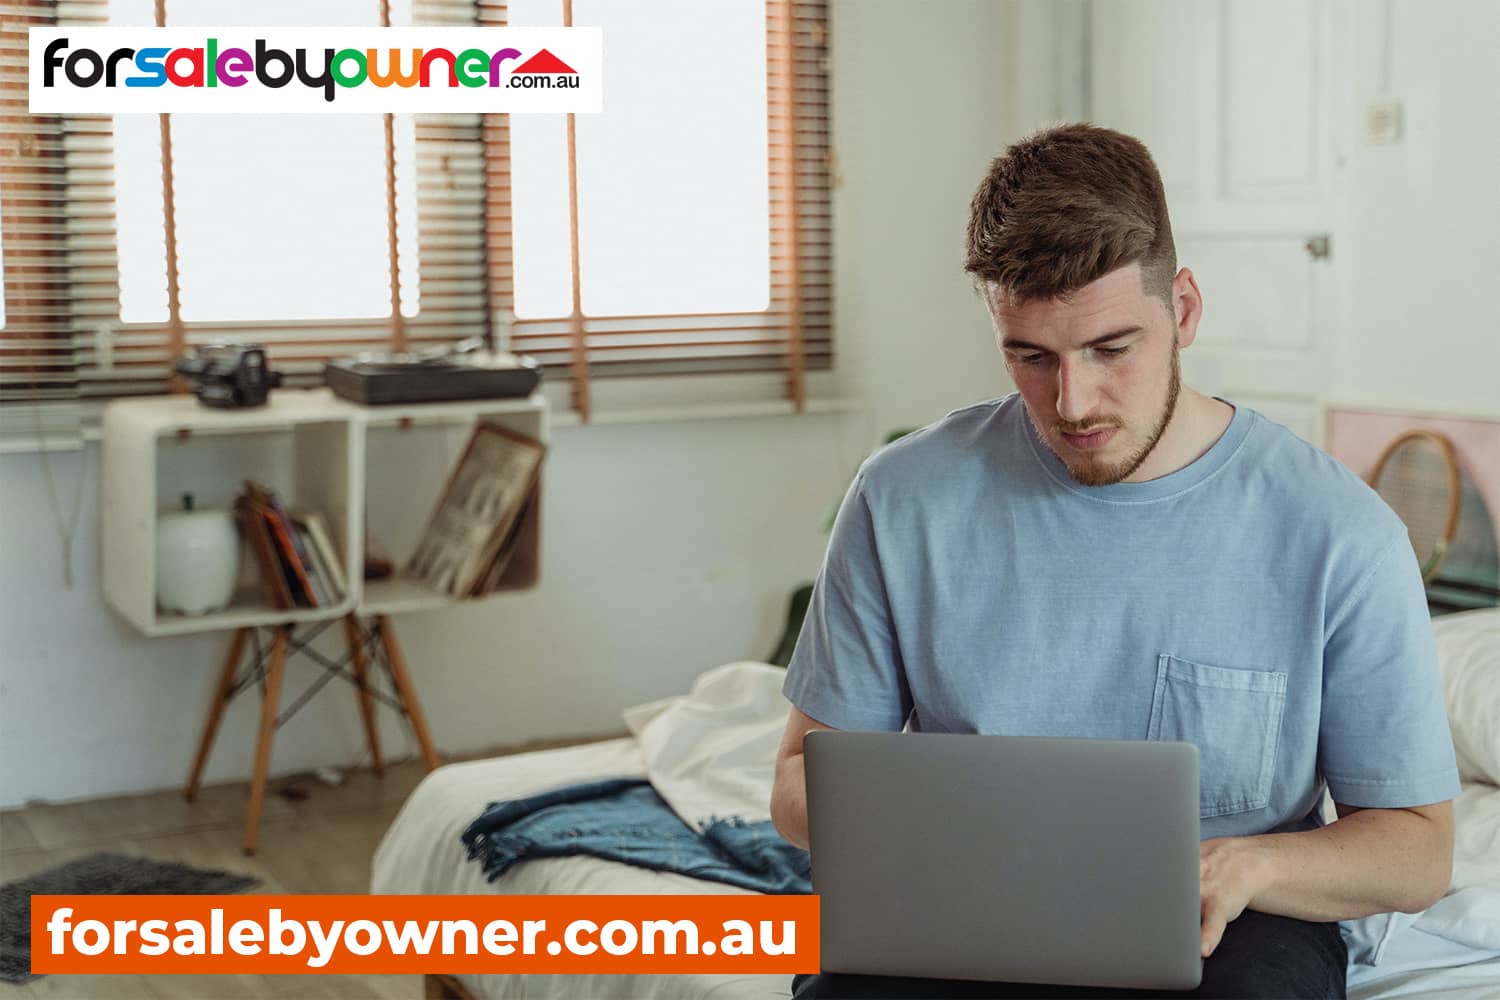 How To Advertise A Rental Property On Realestate.com.au